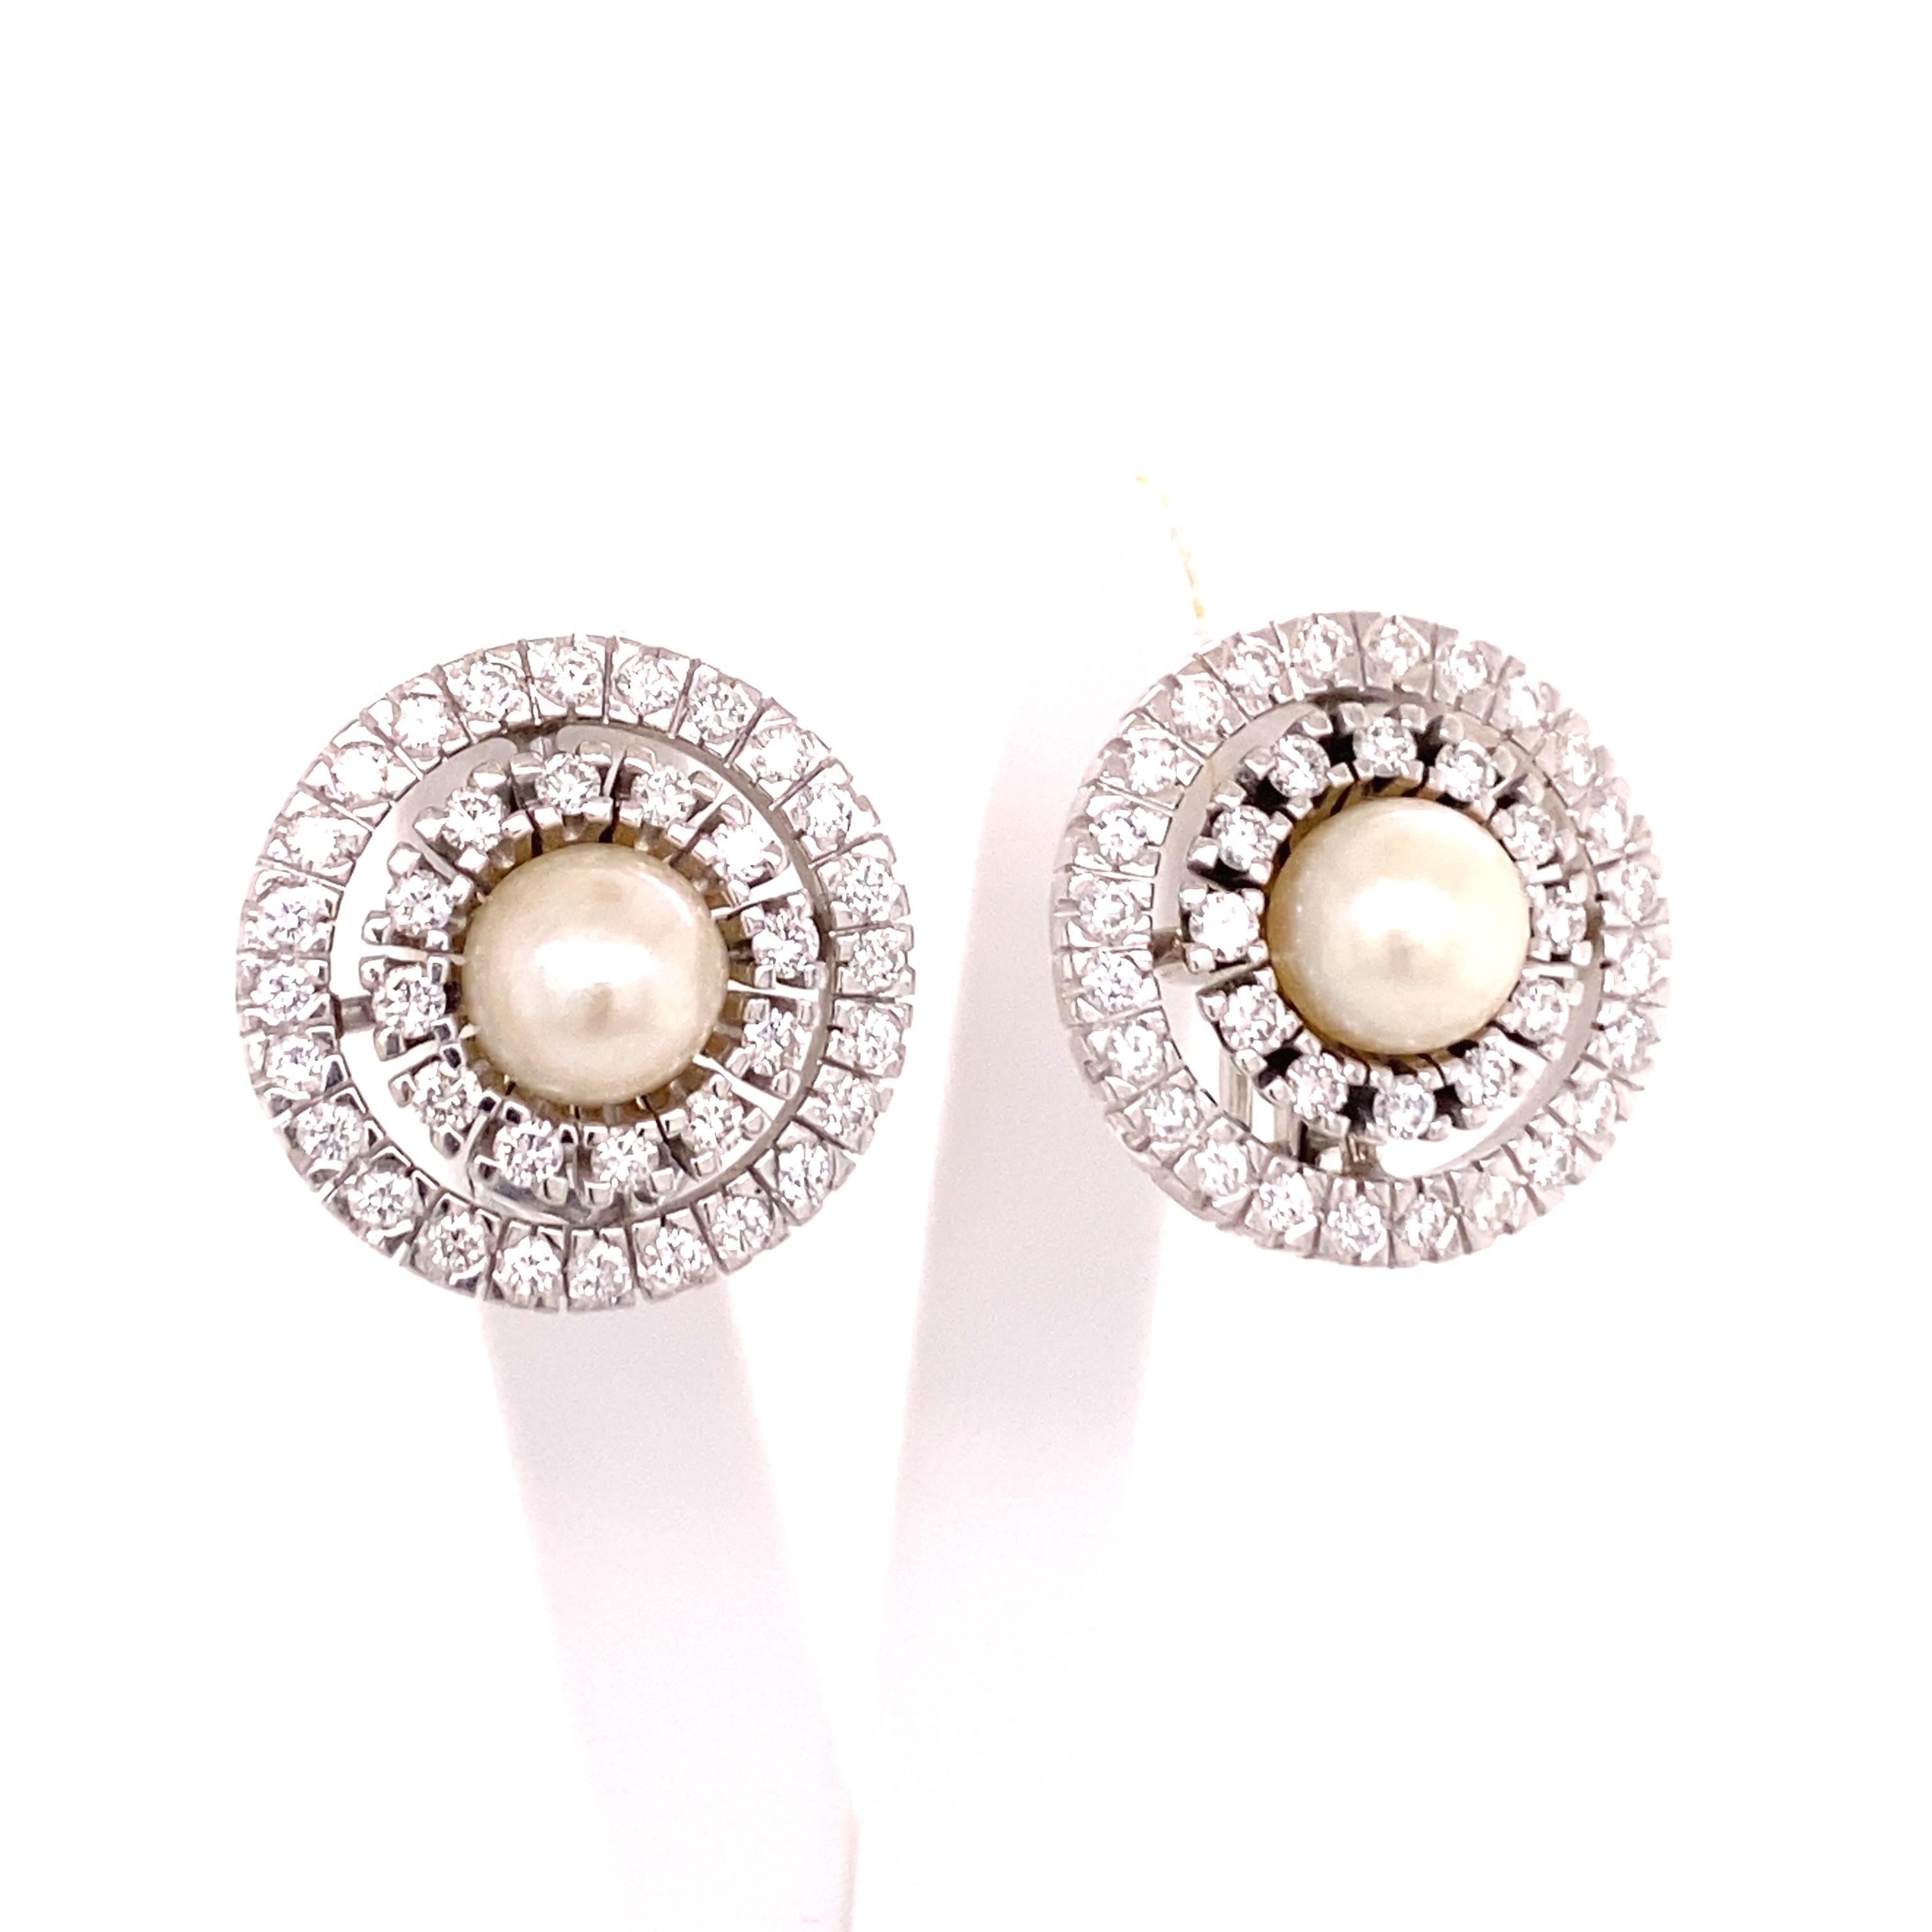 This classic and elegant pair of earclips features two round Akoya cultured pearls of approximately 7.7 mm in diameter. Each cultured pearl is surrounded by a double entourage, set with a total of 72 brilliant-cut diamonds of G/H colour and vs